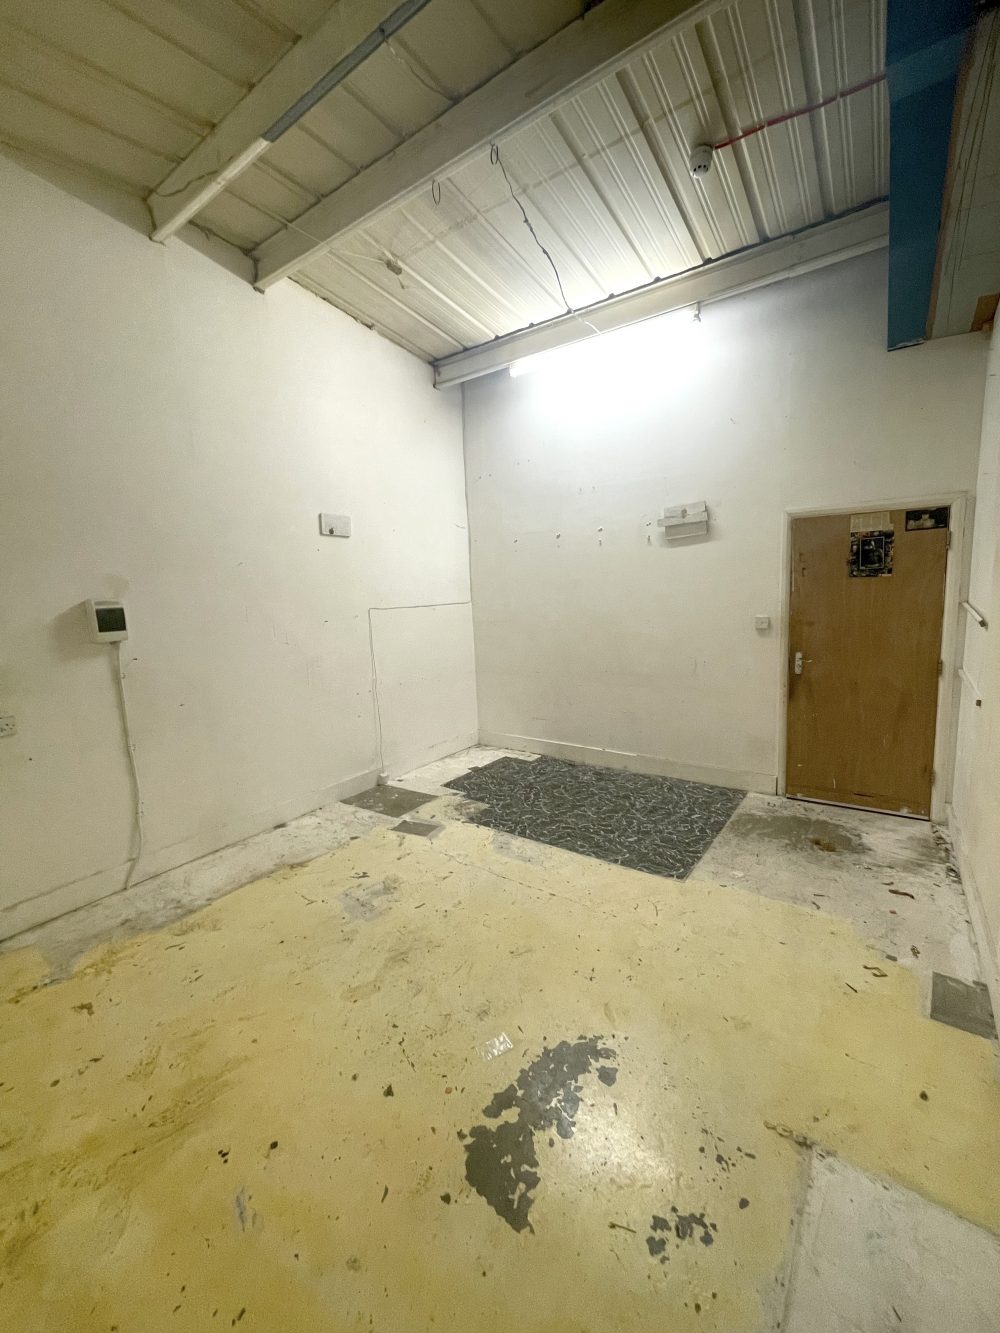 Creative Light industrial Art Studio To Rent in N16 Stoke Newington Shelford Place Pic10